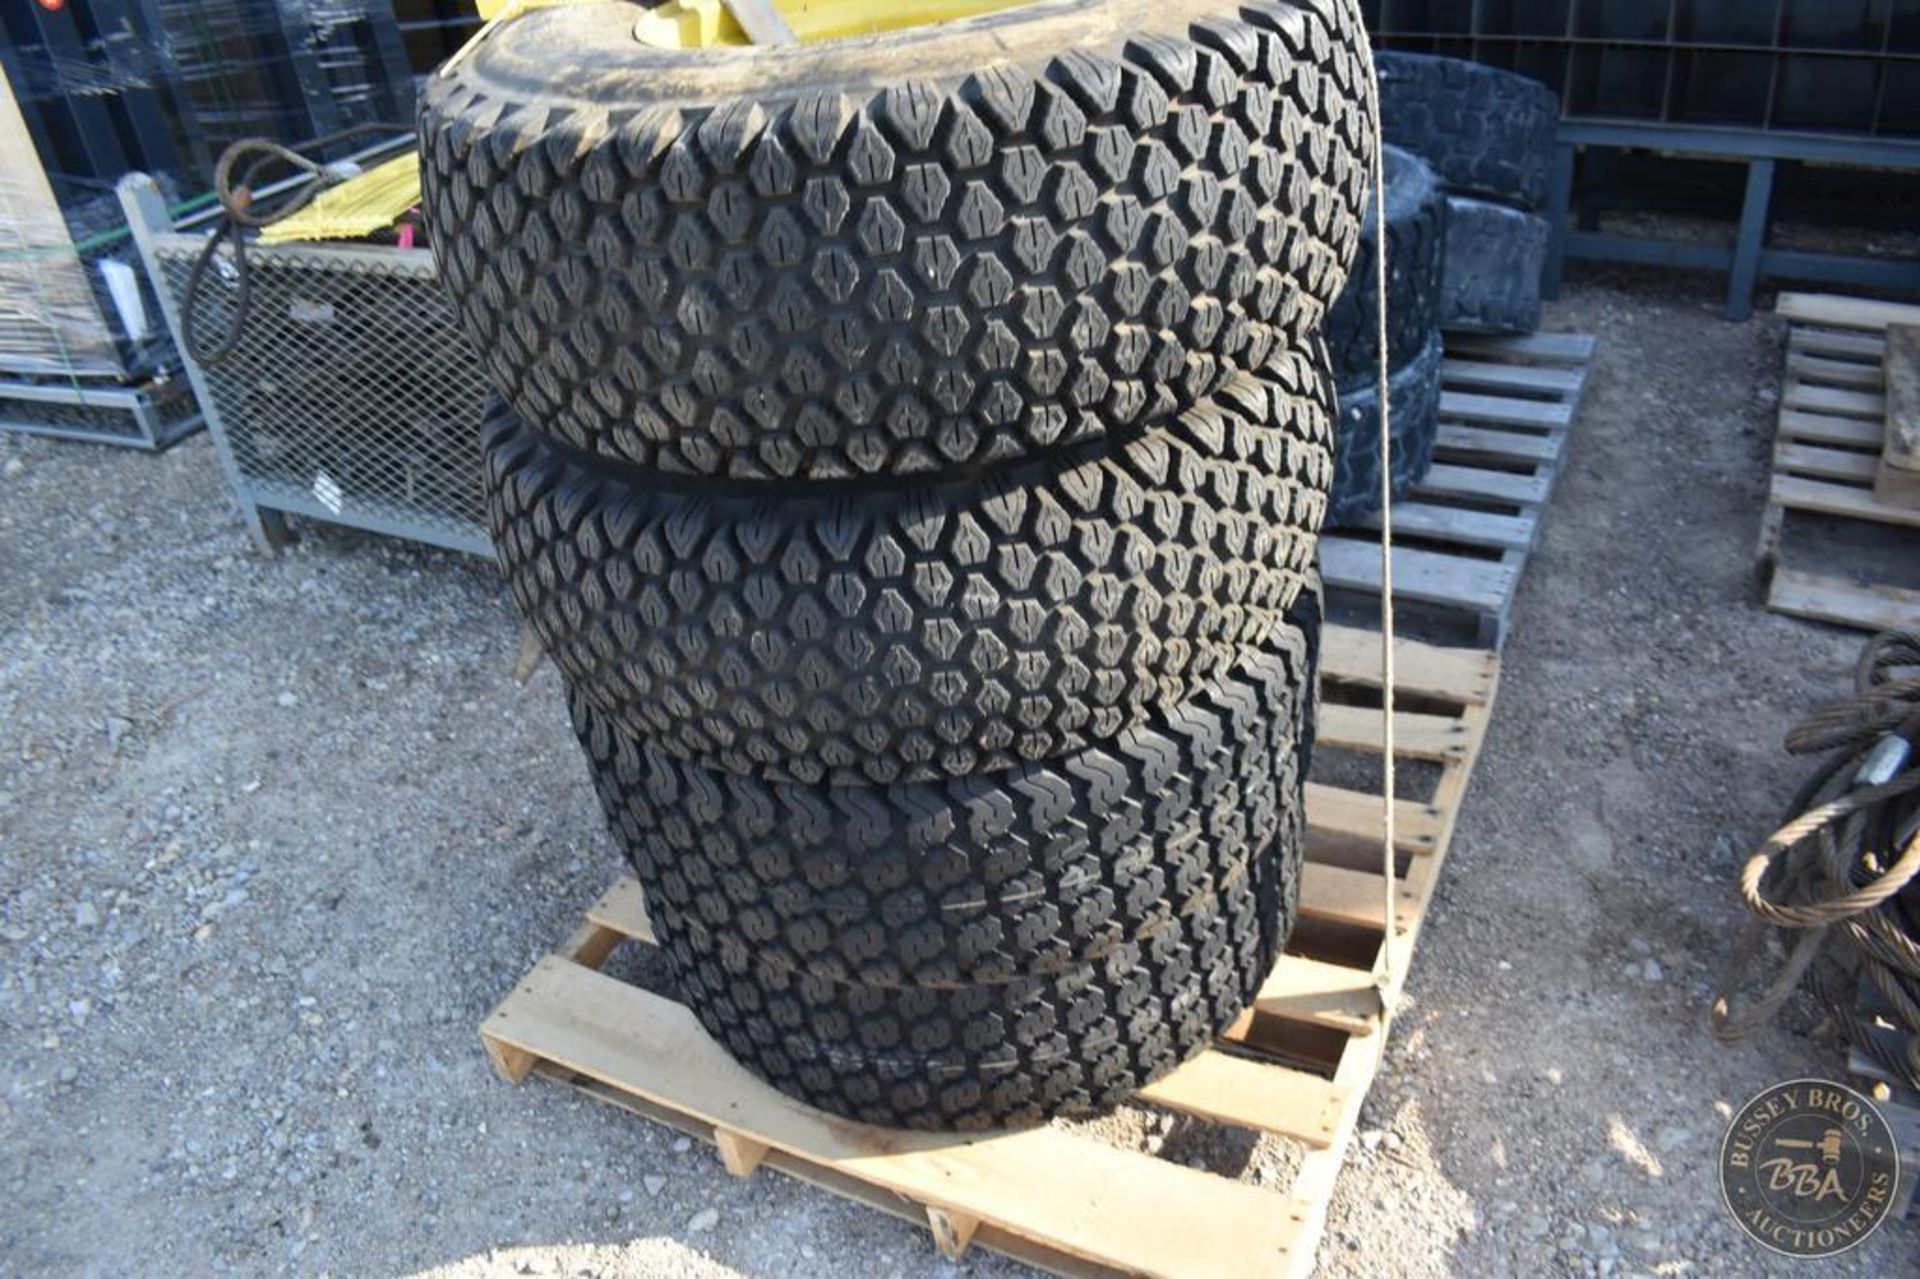 Tires GATOR RIMS AND TIRES 27147 - Image 6 of 12